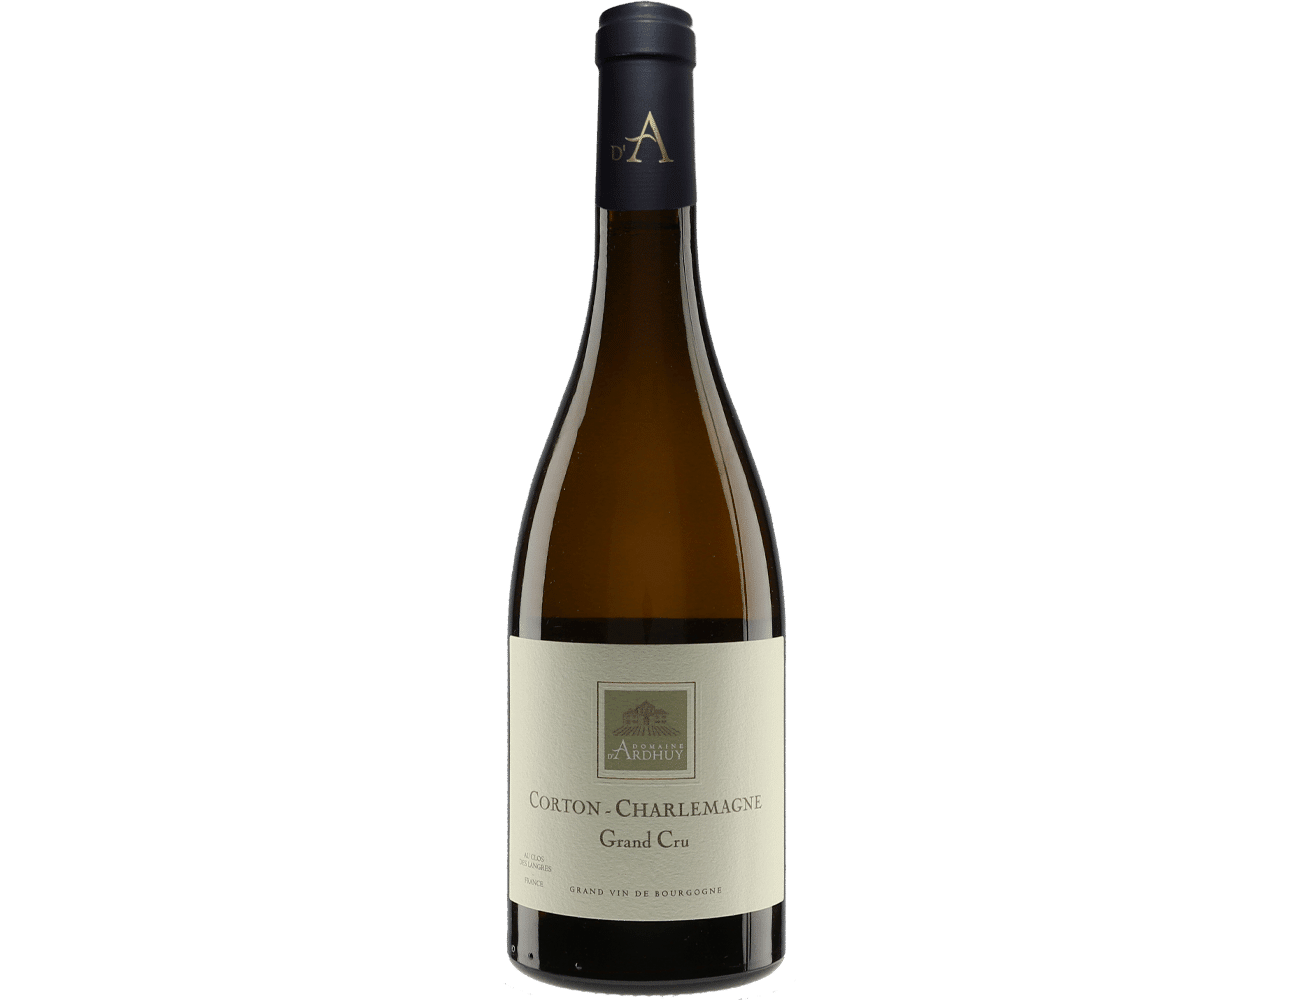 Corton charlemagne grand cru 2019, domaine d’ardhuy, 75cl